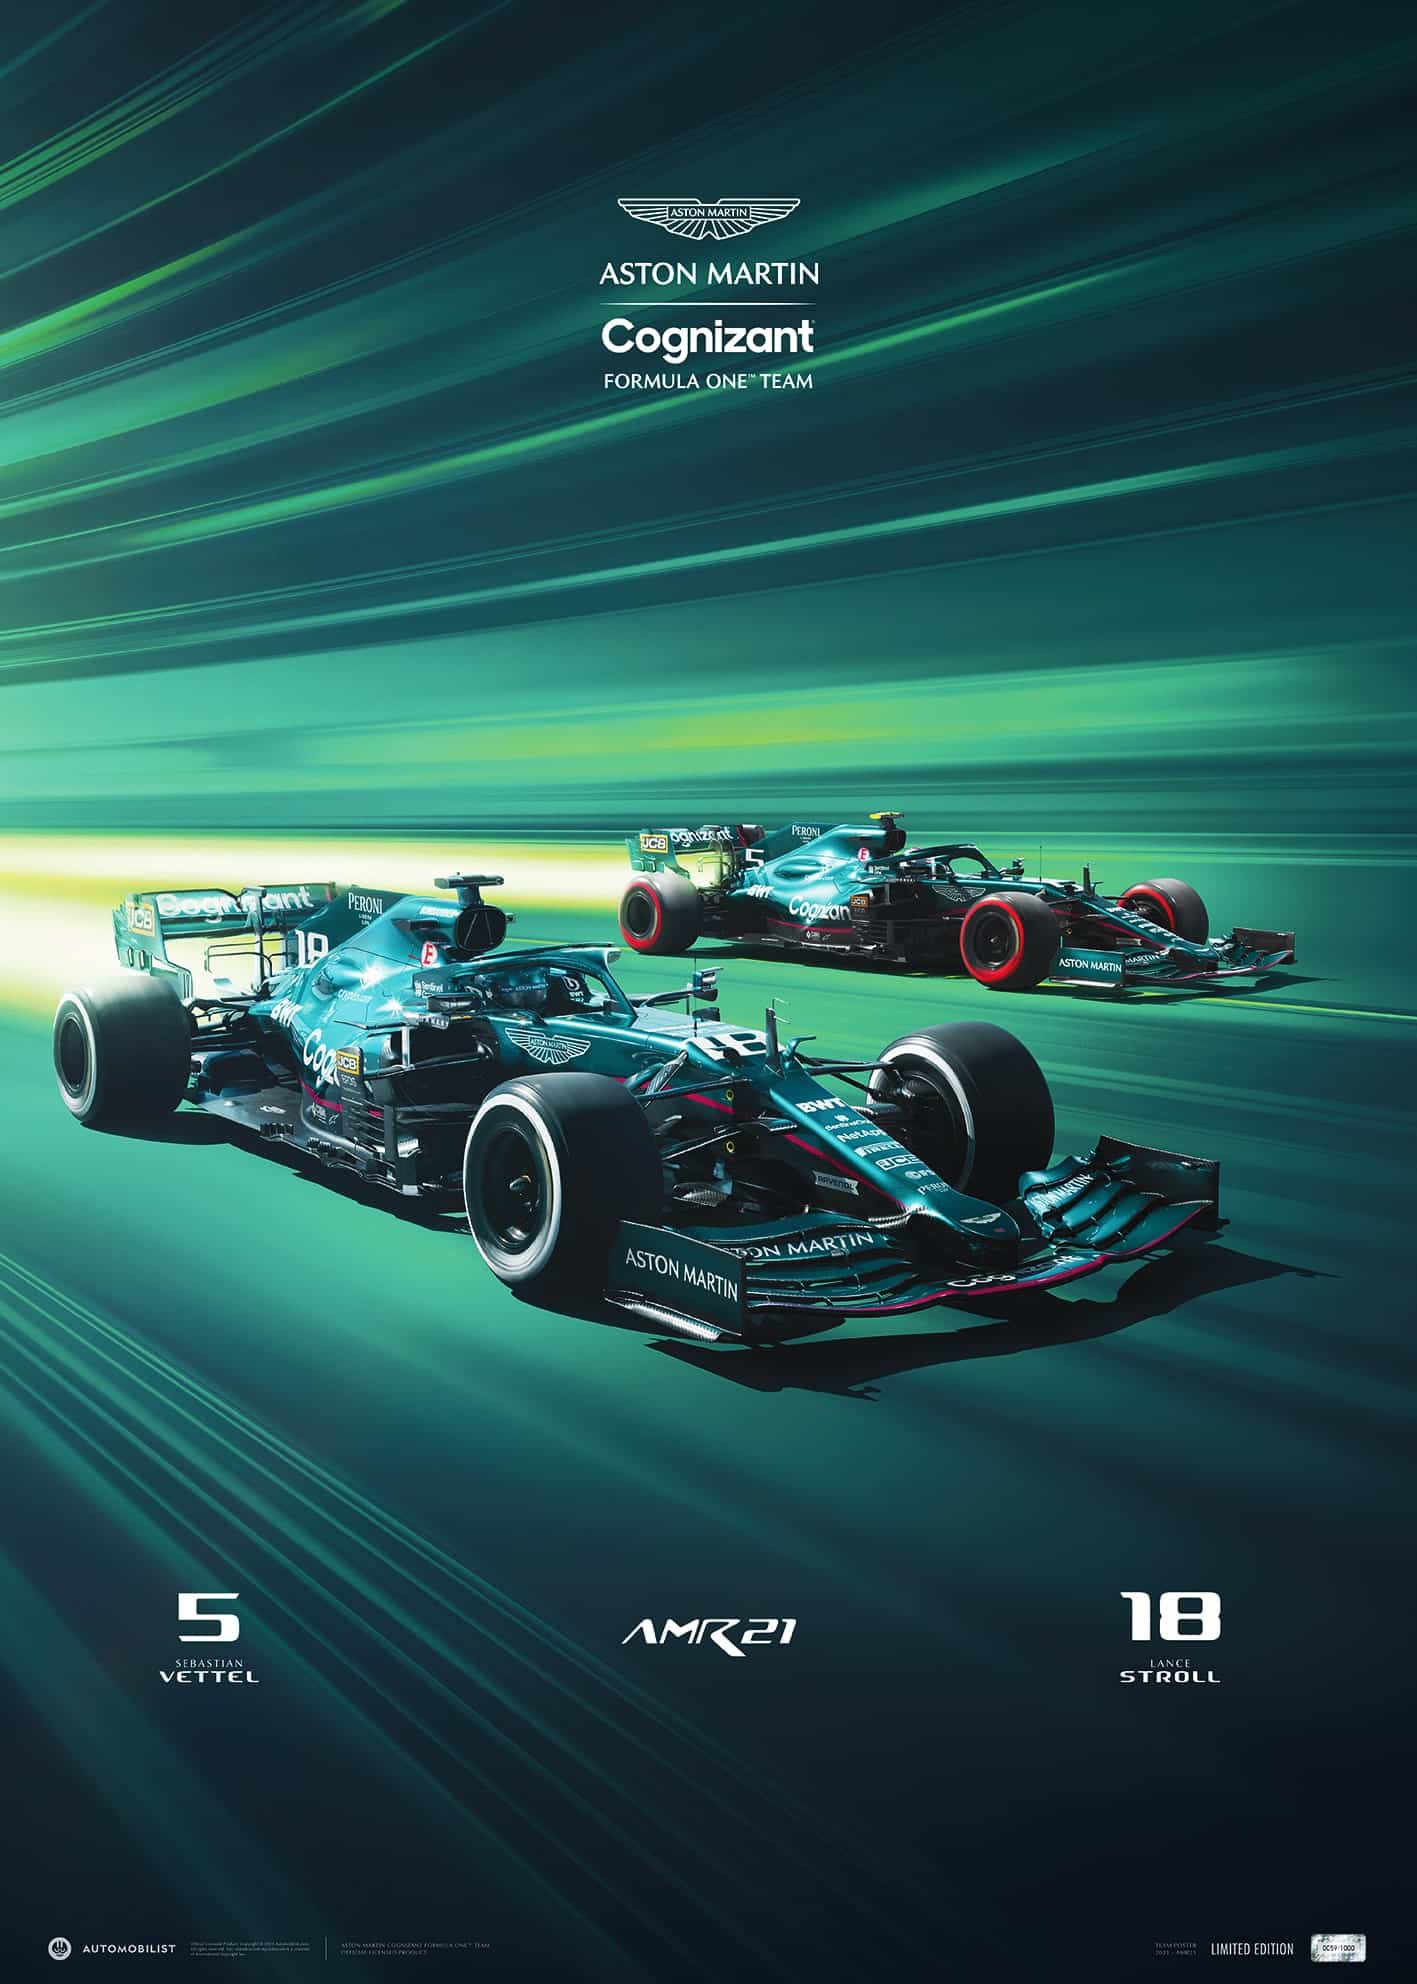 Martin F1 team poster. Limited Edition.